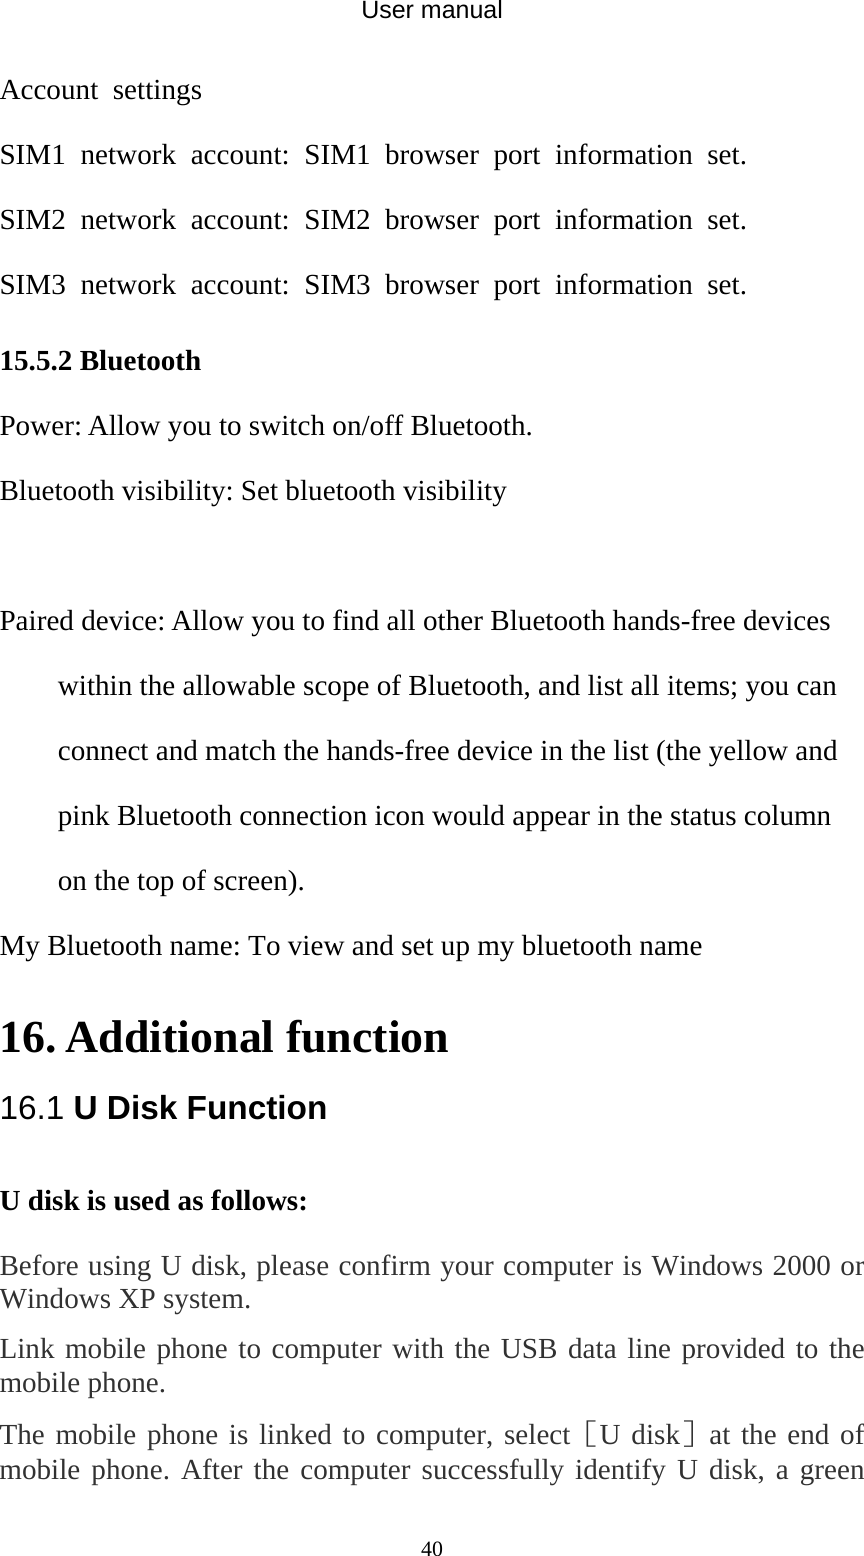 User manual  40Account settings   SIM1 network account: SIM1 browser port information set.  SIM2 network account: SIM2 browser port information set. SIM3 network account: SIM3 browser port information set. 15.5.2 Bluetooth Power: Allow you to switch on/off Bluetooth.   Bluetooth visibility: Set bluetooth visibility  Paired device: Allow you to find all other Bluetooth hands-free devices within the allowable scope of Bluetooth, and list all items; you can connect and match the hands-free device in the list (the yellow and pink Bluetooth connection icon would appear in the status column on the top of screen).   My Bluetooth name: To view and set up my bluetooth name  16. Additional function 16.1 U Disk Function U disk is used as follows:   Before using U disk, please confirm your computer is Windows 2000 or Windows XP system.   Link mobile phone to computer with the USB data line provided to the mobile phone. The mobile phone is linked to computer, select［U disk］at the end of mobile phone. After the computer successfully identify U disk, a green 